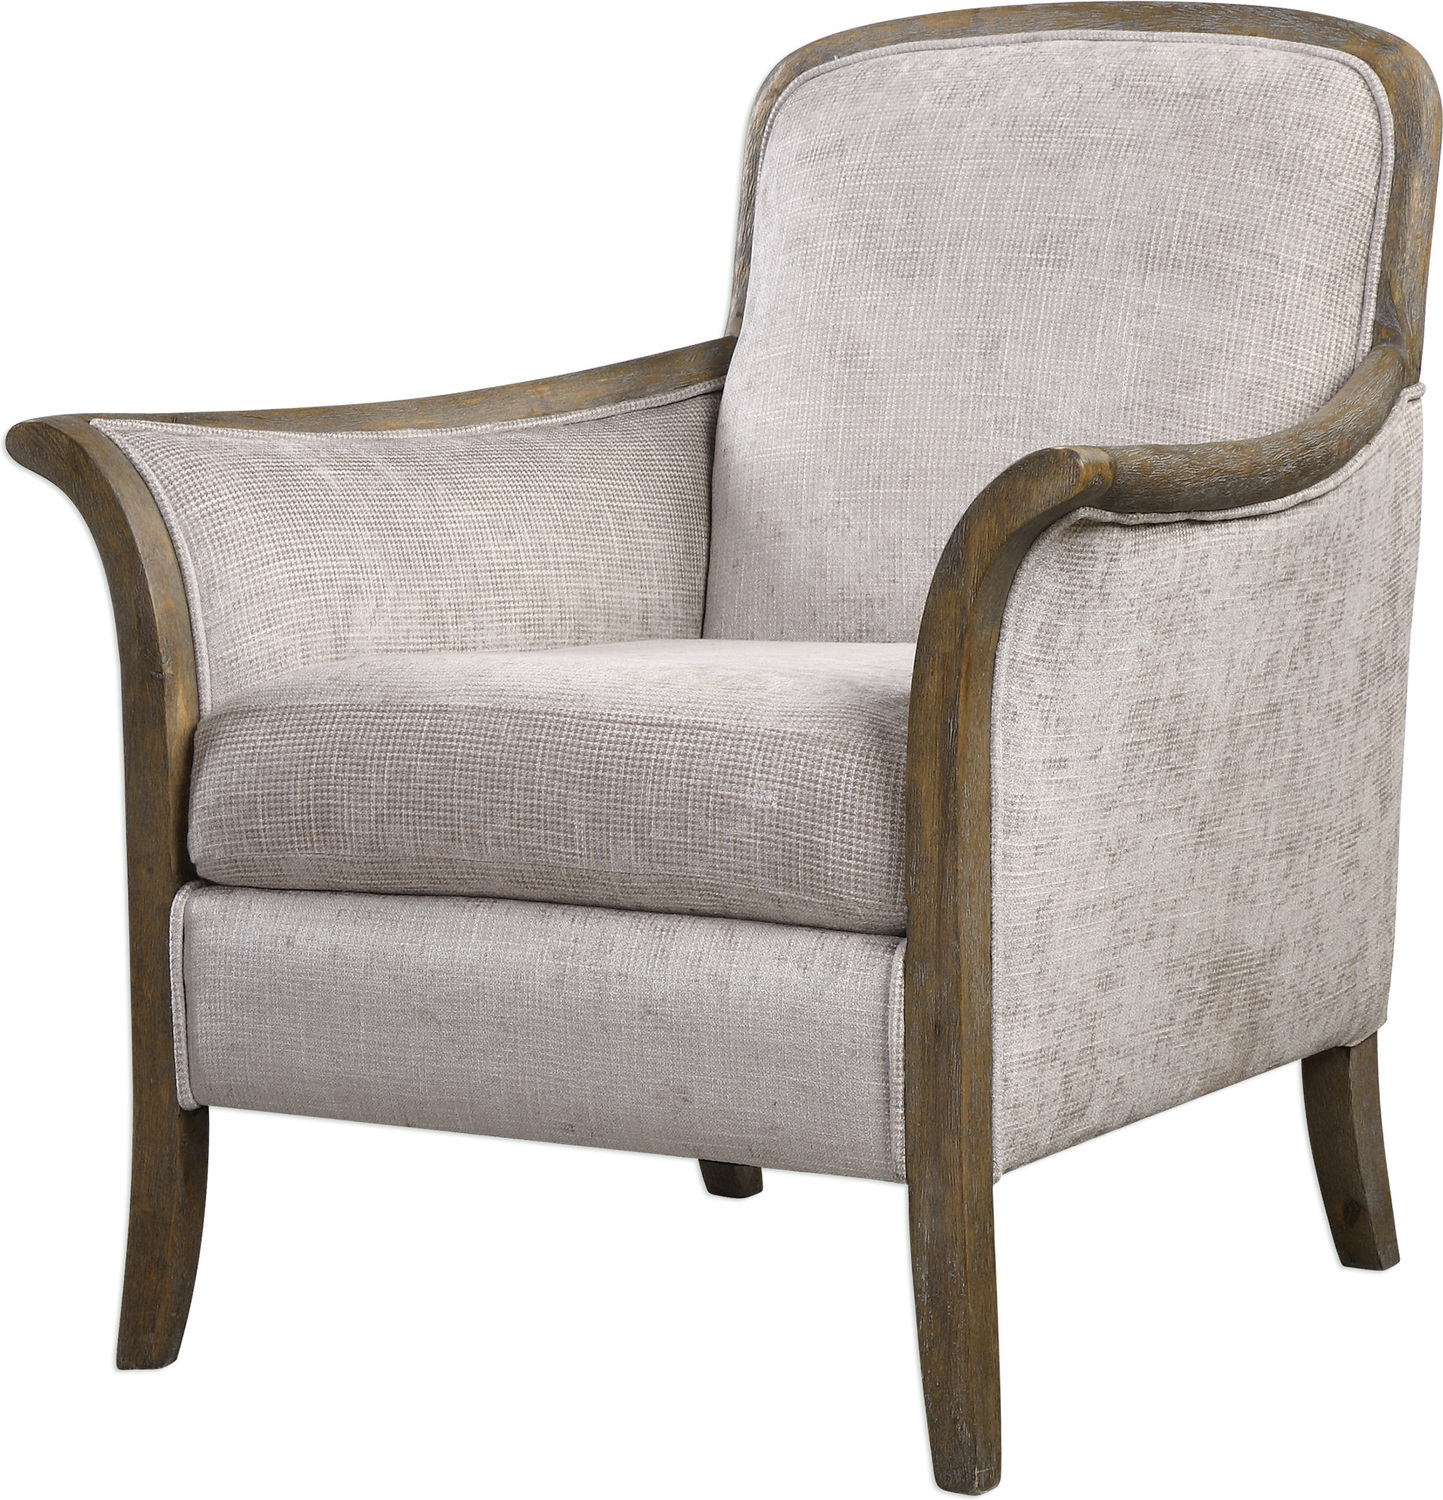 leather swivel arm chair Uttermost  Accent Chairs & Armchairs Solidly Constructed Chair Featuring Exposed Hardwood Finished In A Weathered Pecan And Tailored In Soft And Woven Shades Of Taupe And Stone. Welting Adds To The Elegance Of Itâ€™s Shape Amplifying Fluid Lines All The Way Down To The Tapered Legs. Seat Height Is 19â€�.